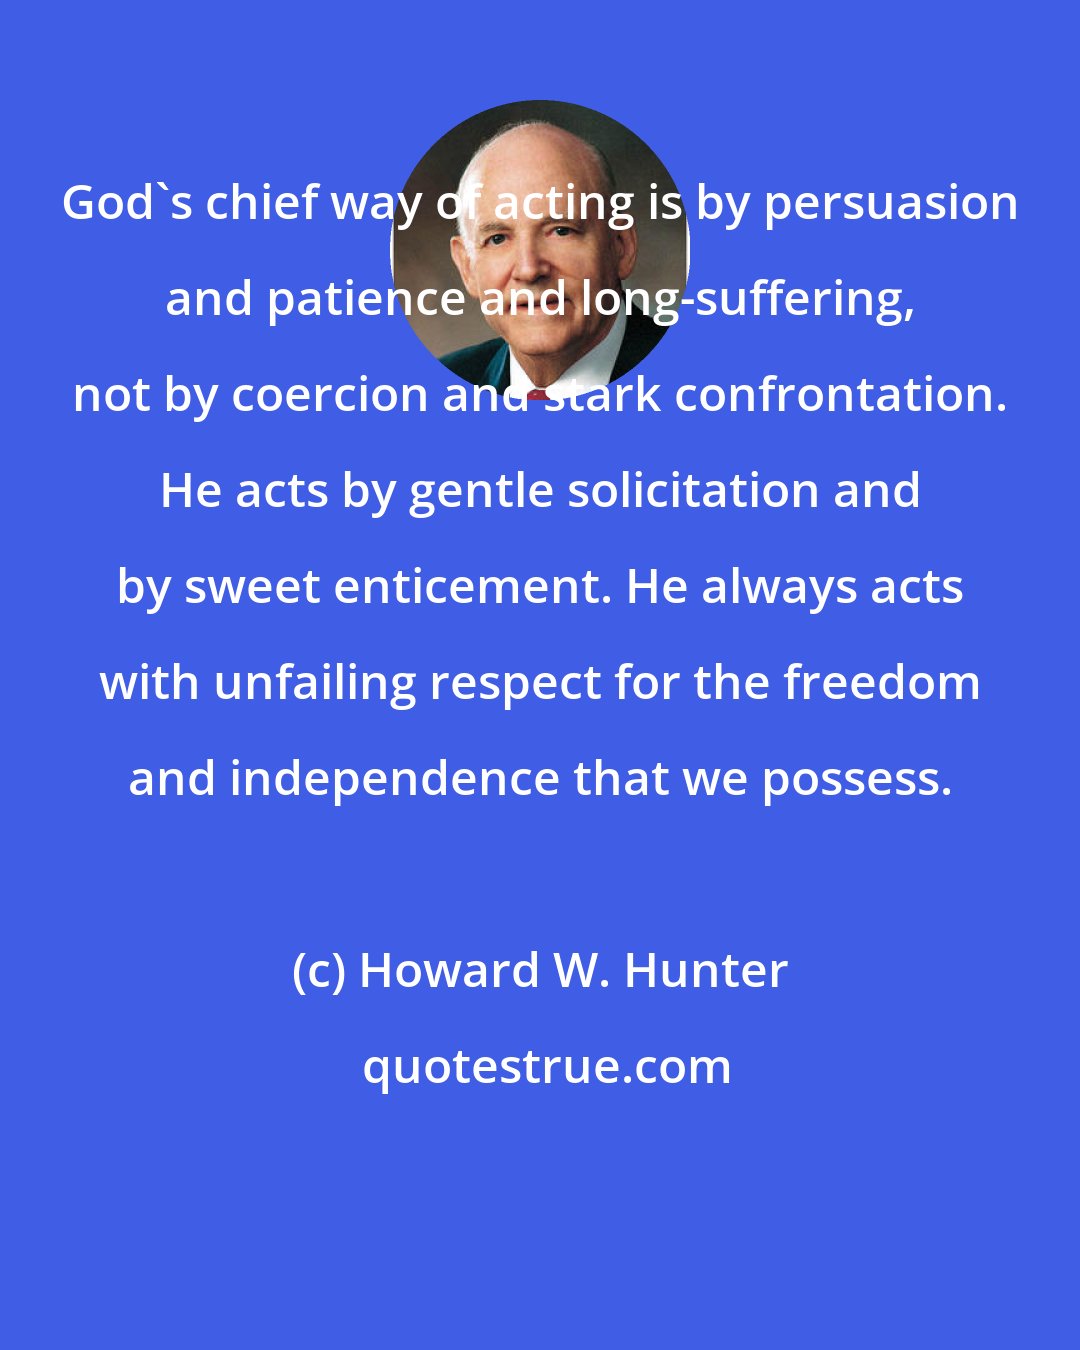 Howard W. Hunter: God's chief way of acting is by persuasion and patience and long-suffering, not by coercion and stark confrontation. He acts by gentle solicitation and by sweet enticement. He always acts with unfailing respect for the freedom and independence that we possess.